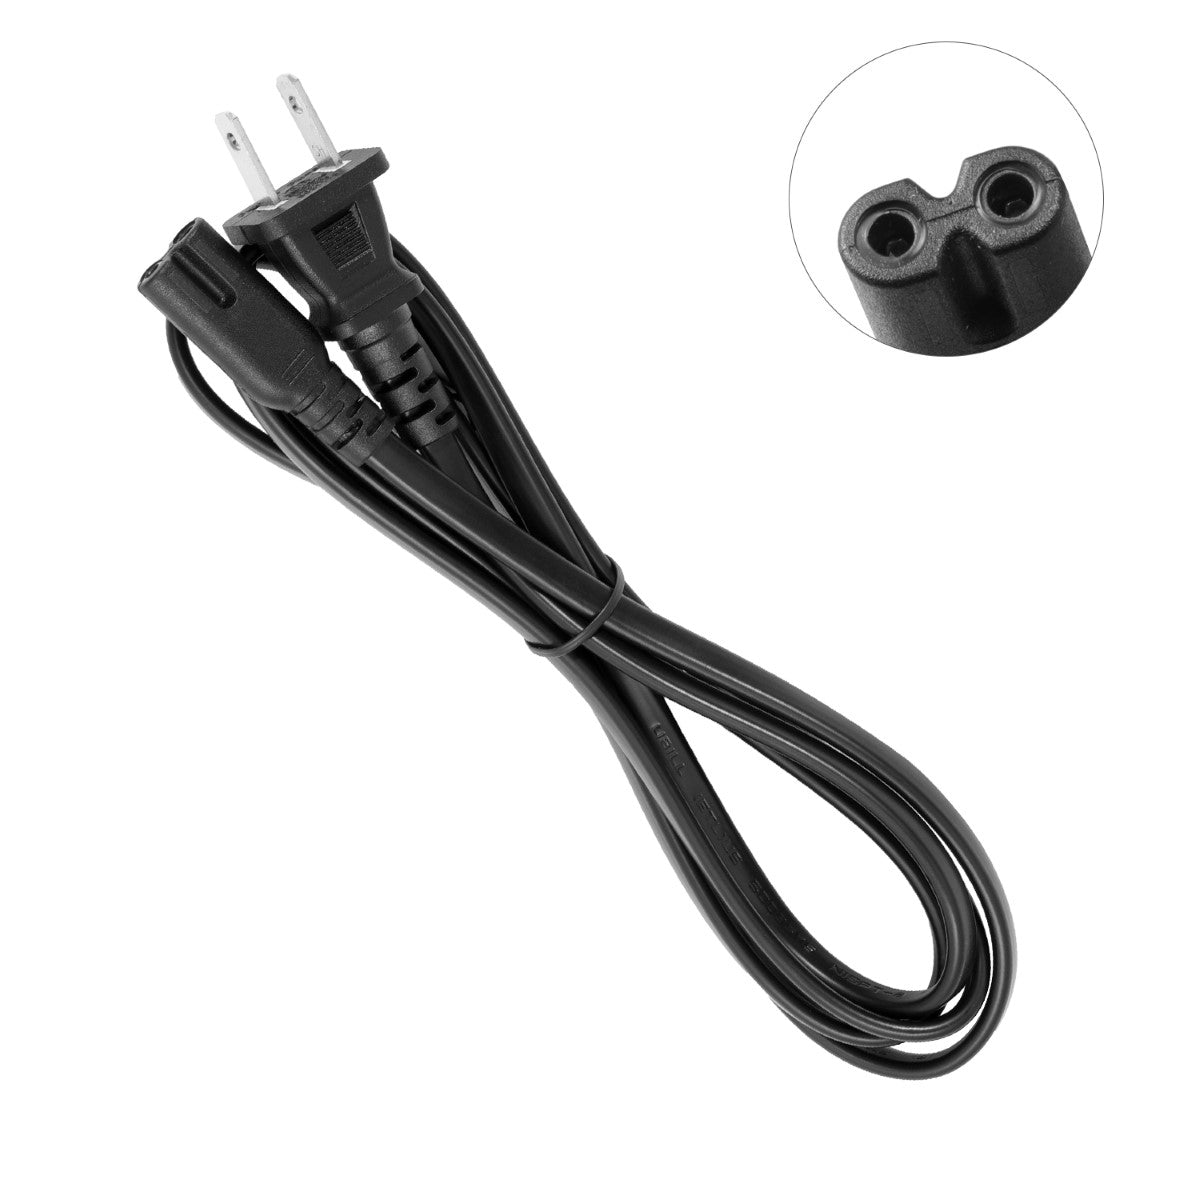 Power Cord for HP ENVY 4502 e-All-in-One Printer.